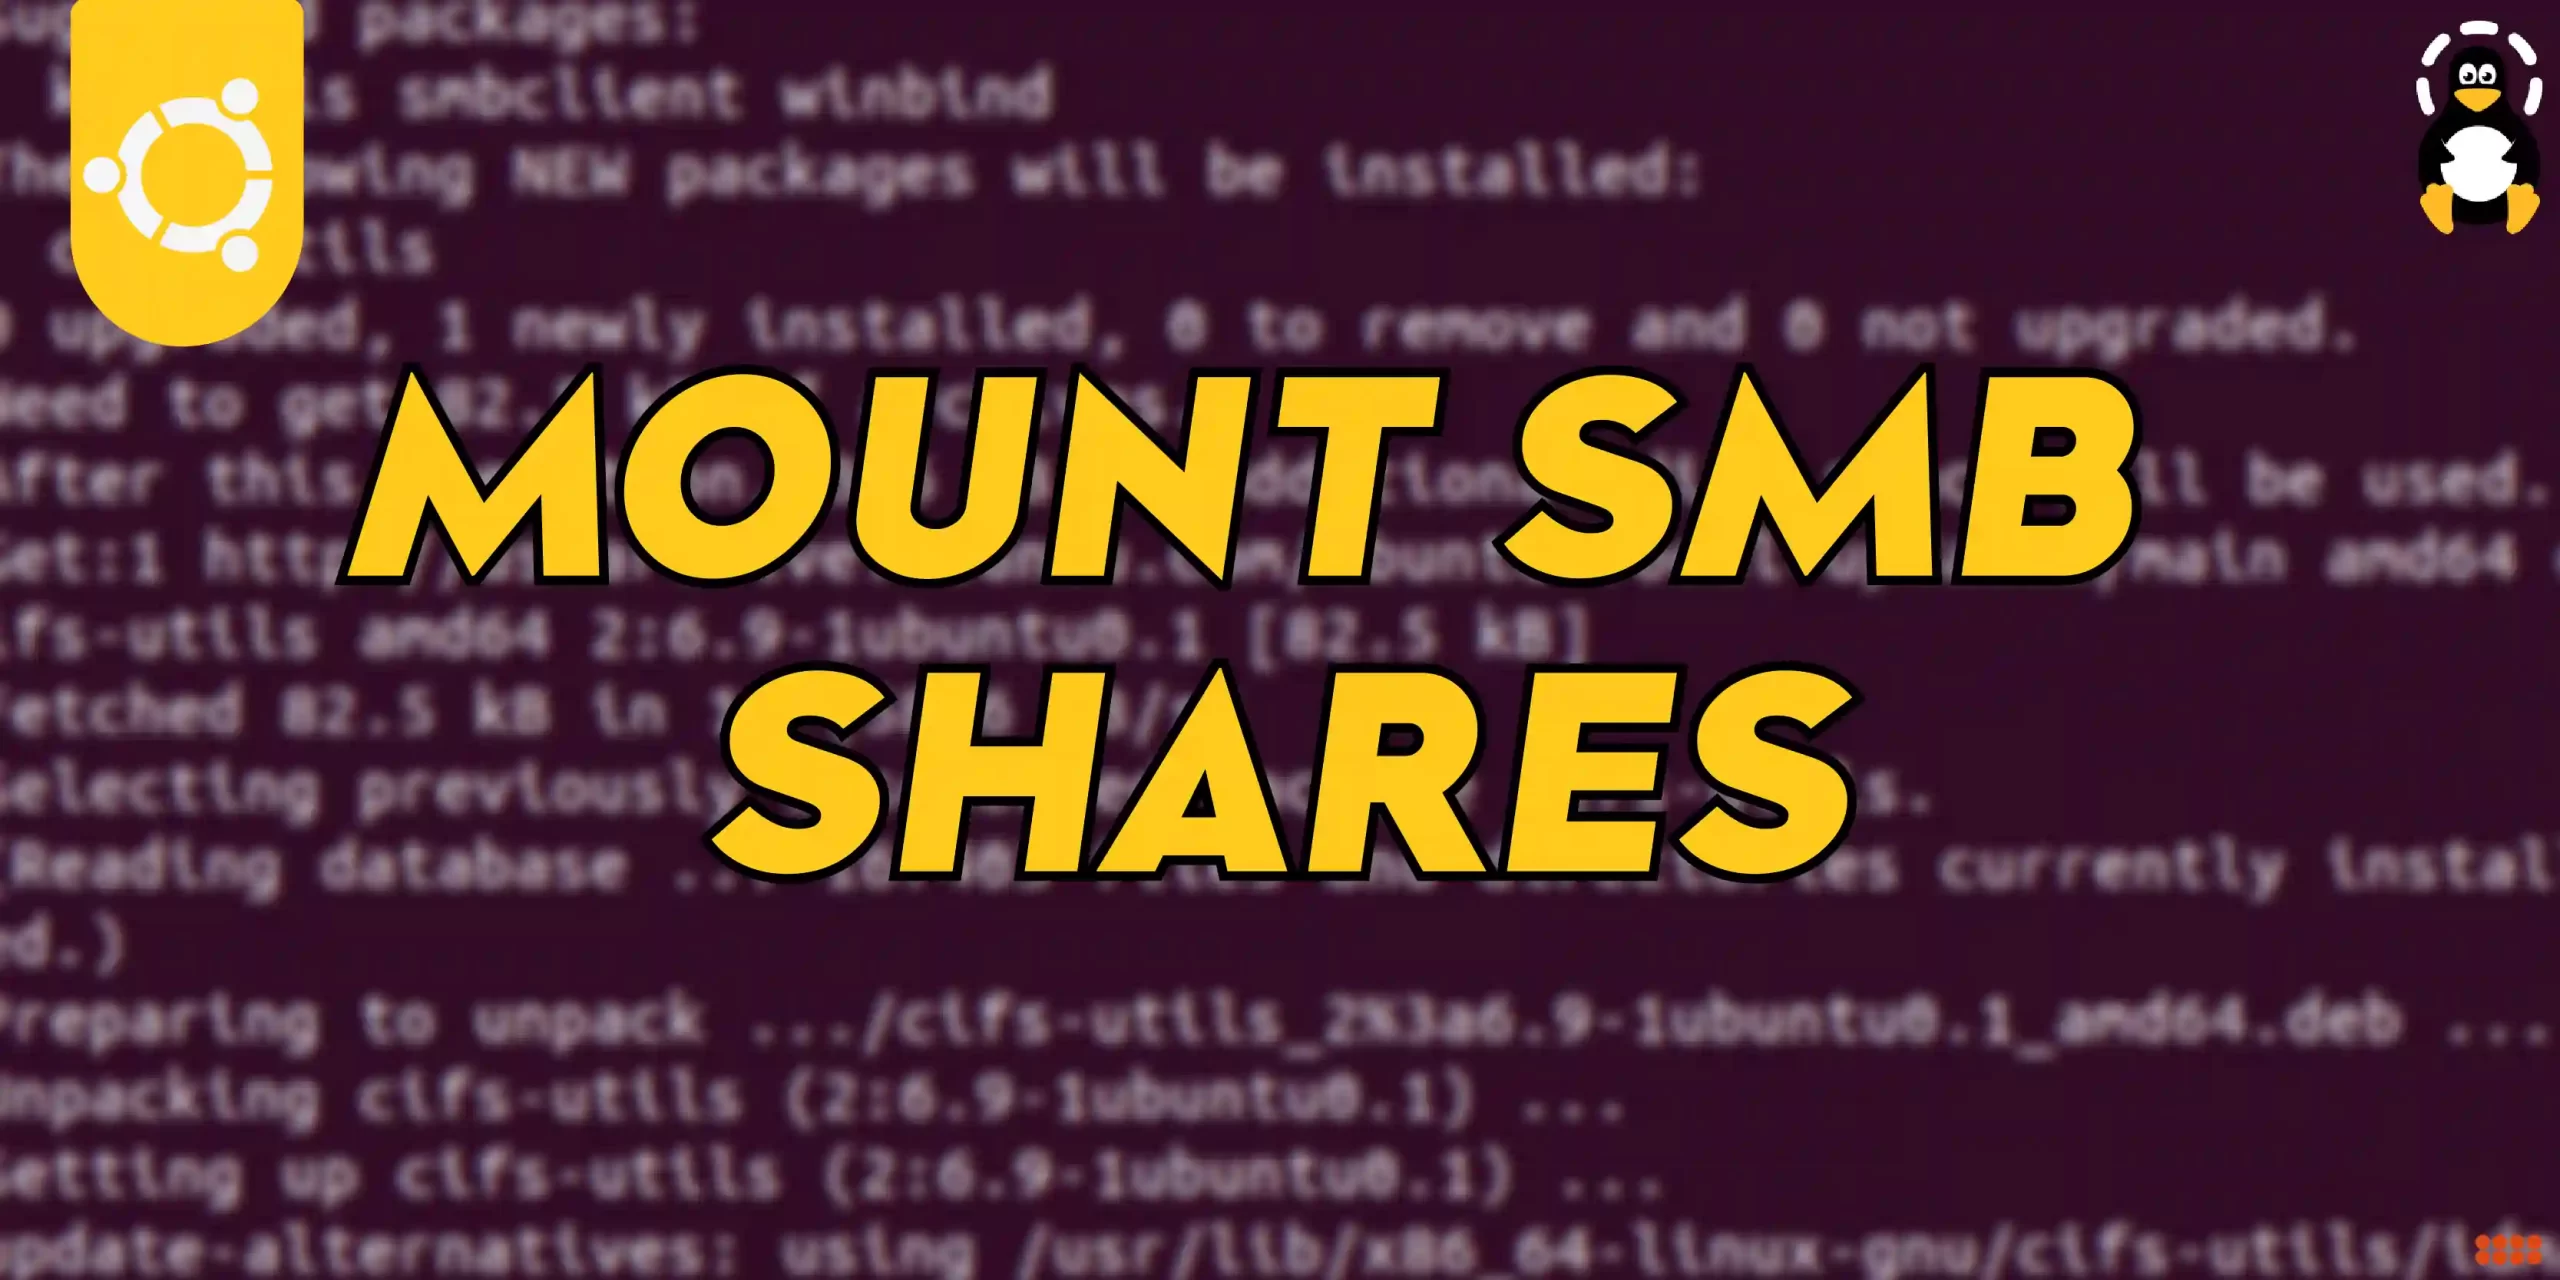 How to mount SMB shares in ubuntu 22.04